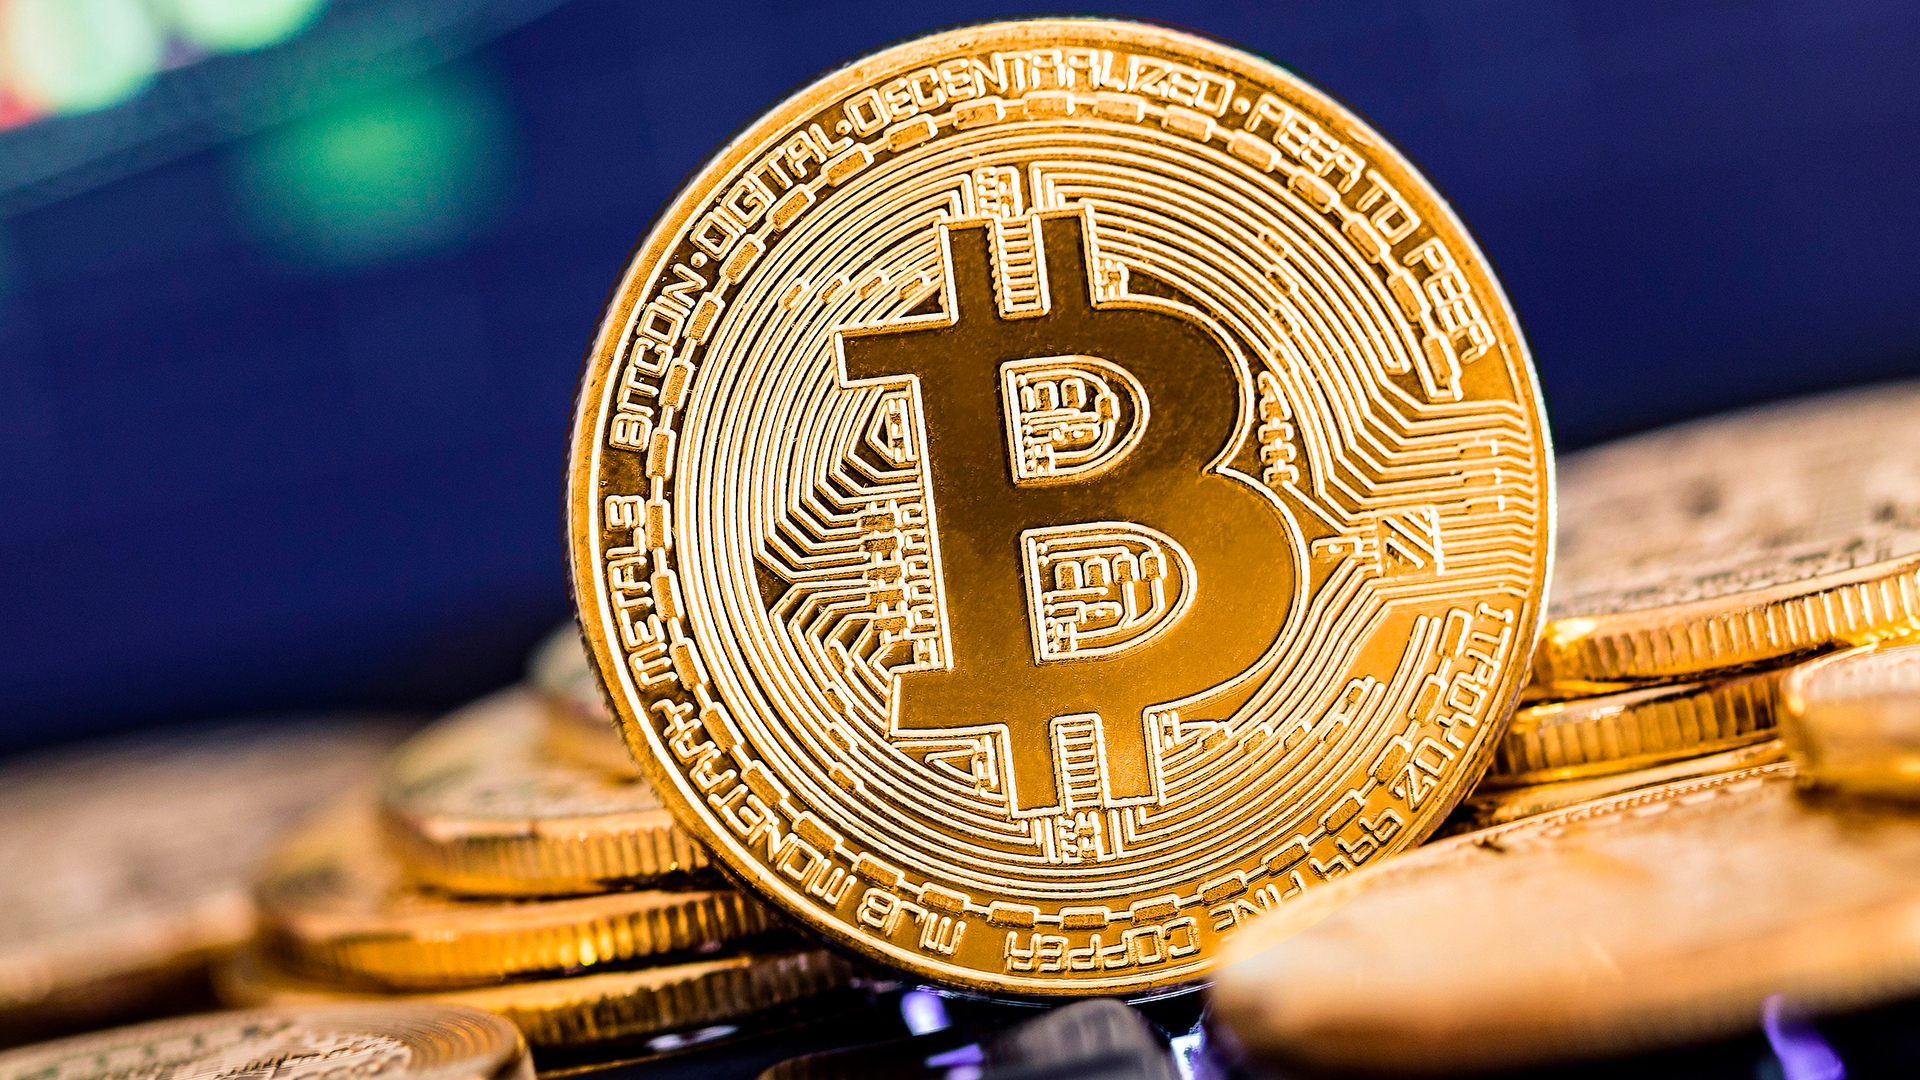 Bitcoin Cryptocurrency Wallpaper - Themes10.win